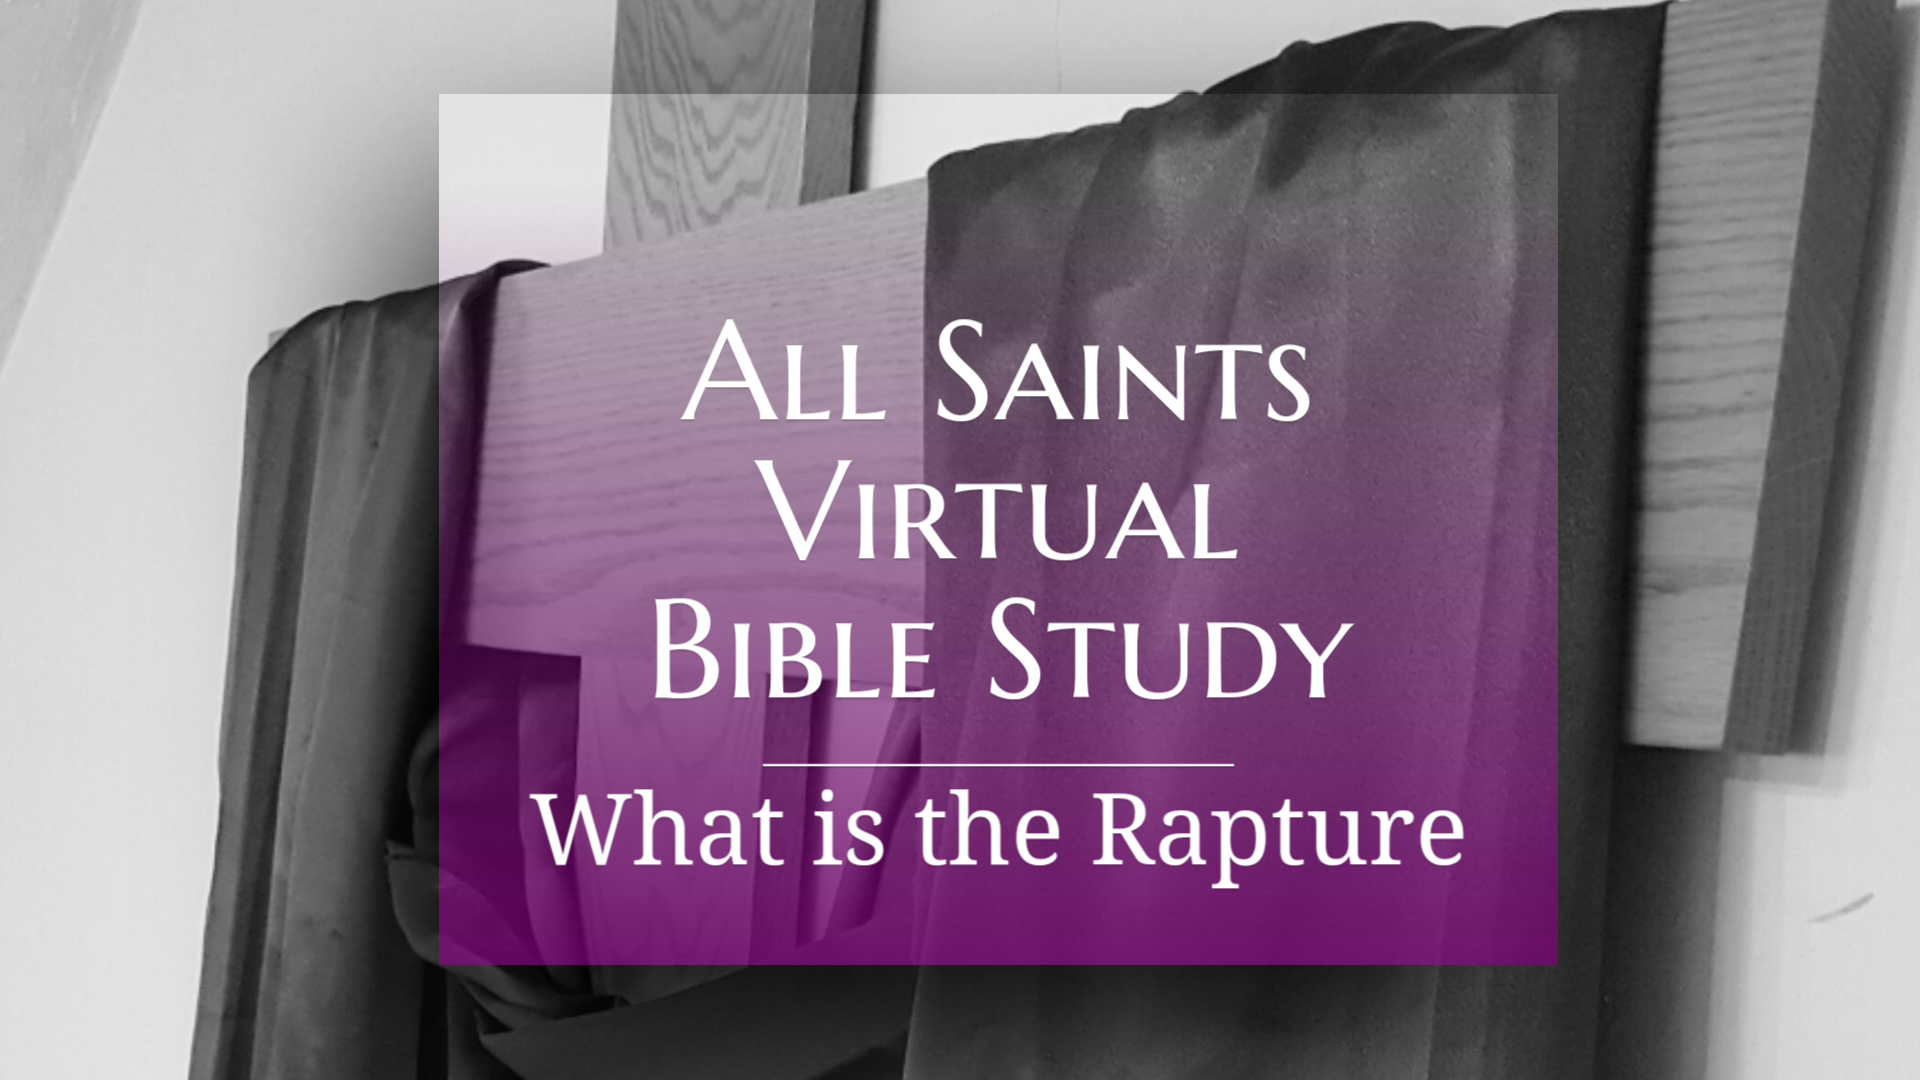 All Saints Virtual Bible Study - What is the Rapture